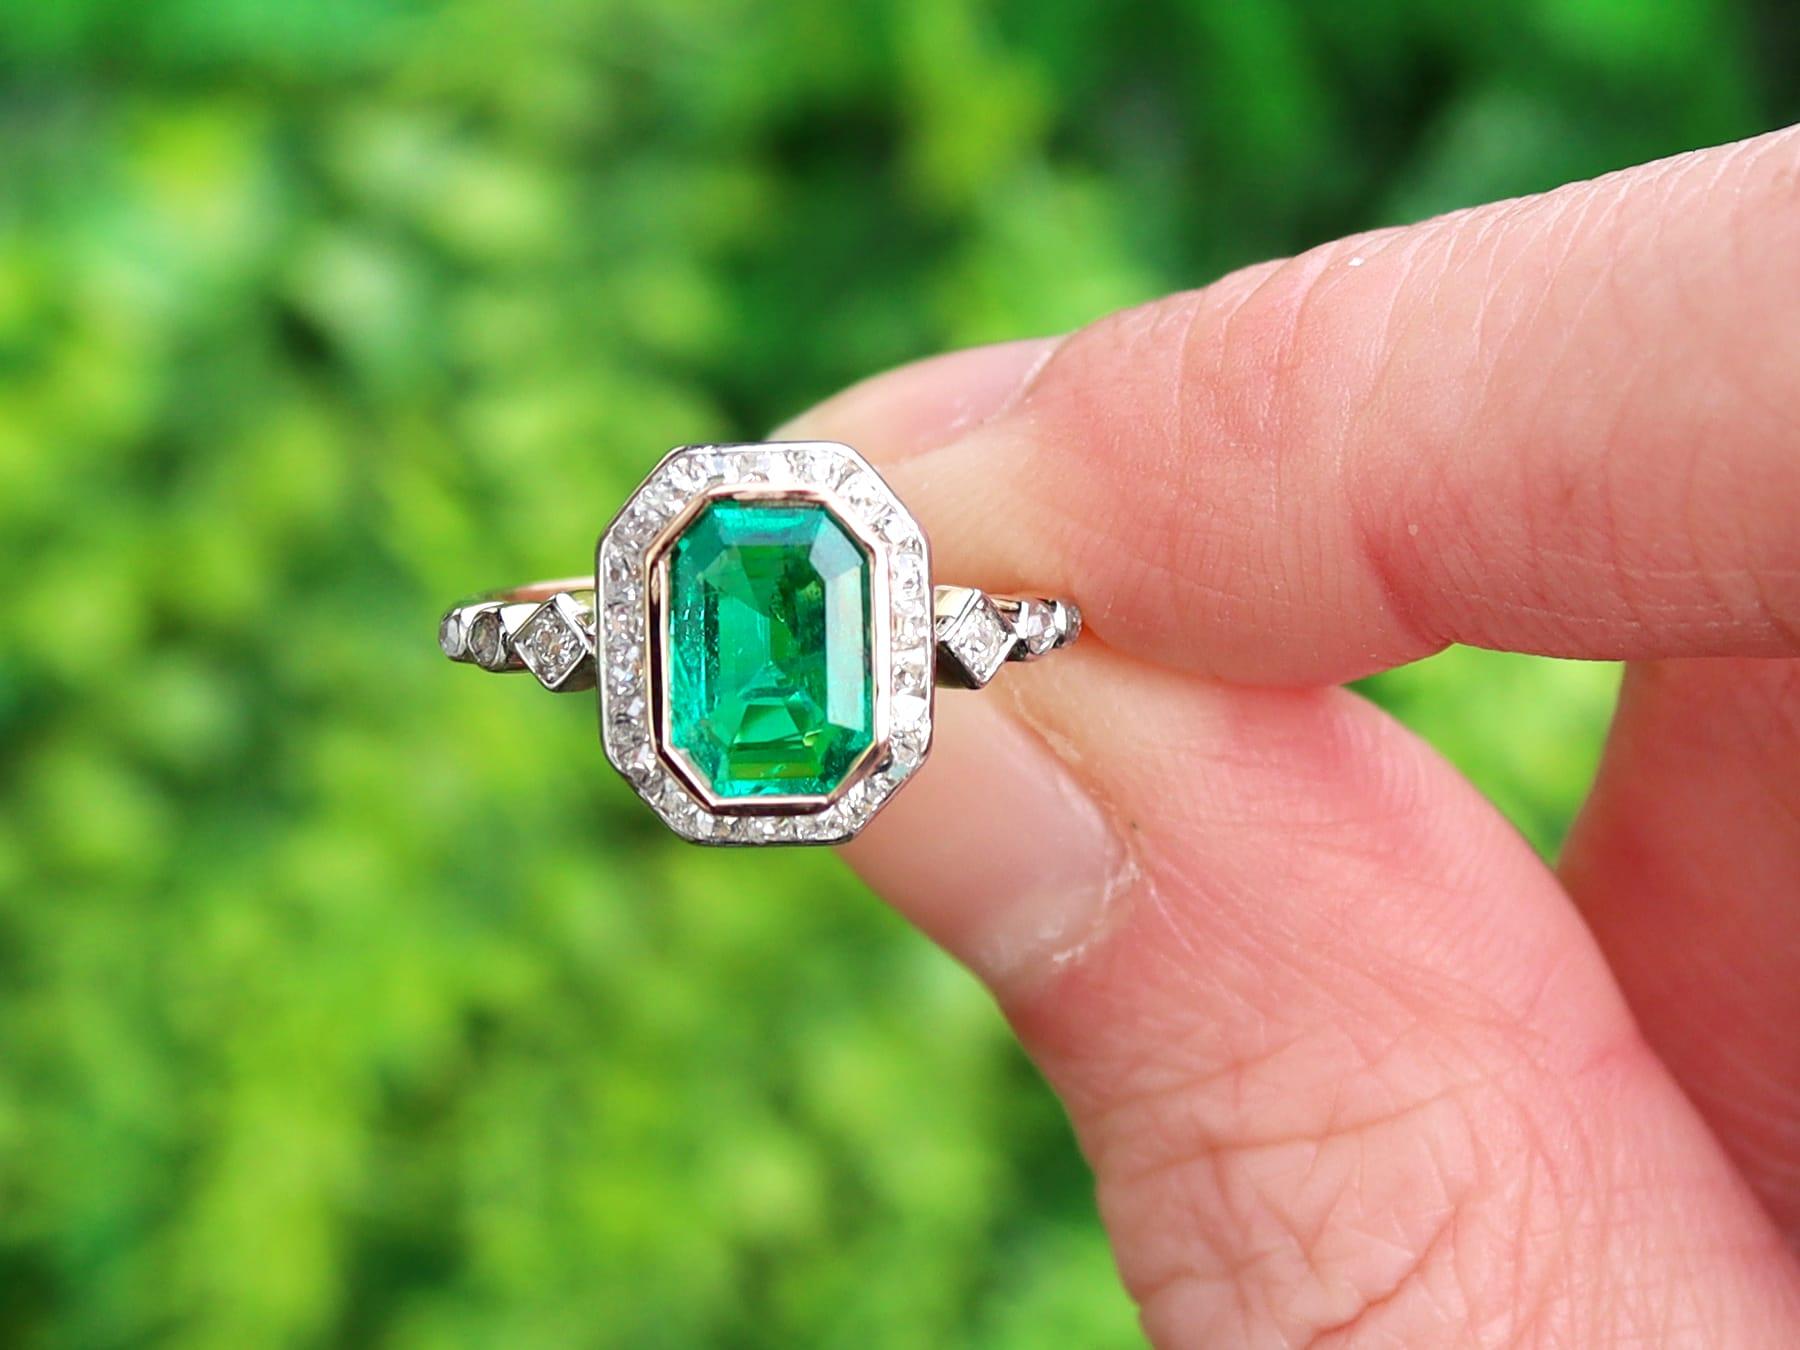 A stunning, fine and impressive emerald cut 1.07 carat Colombian emerald and 0.45 carat diamond, 14 karat yellow gold and platinum set ring; part of our antique emerald engagement rings collection.

This stunning, fine and impressive antique emerald